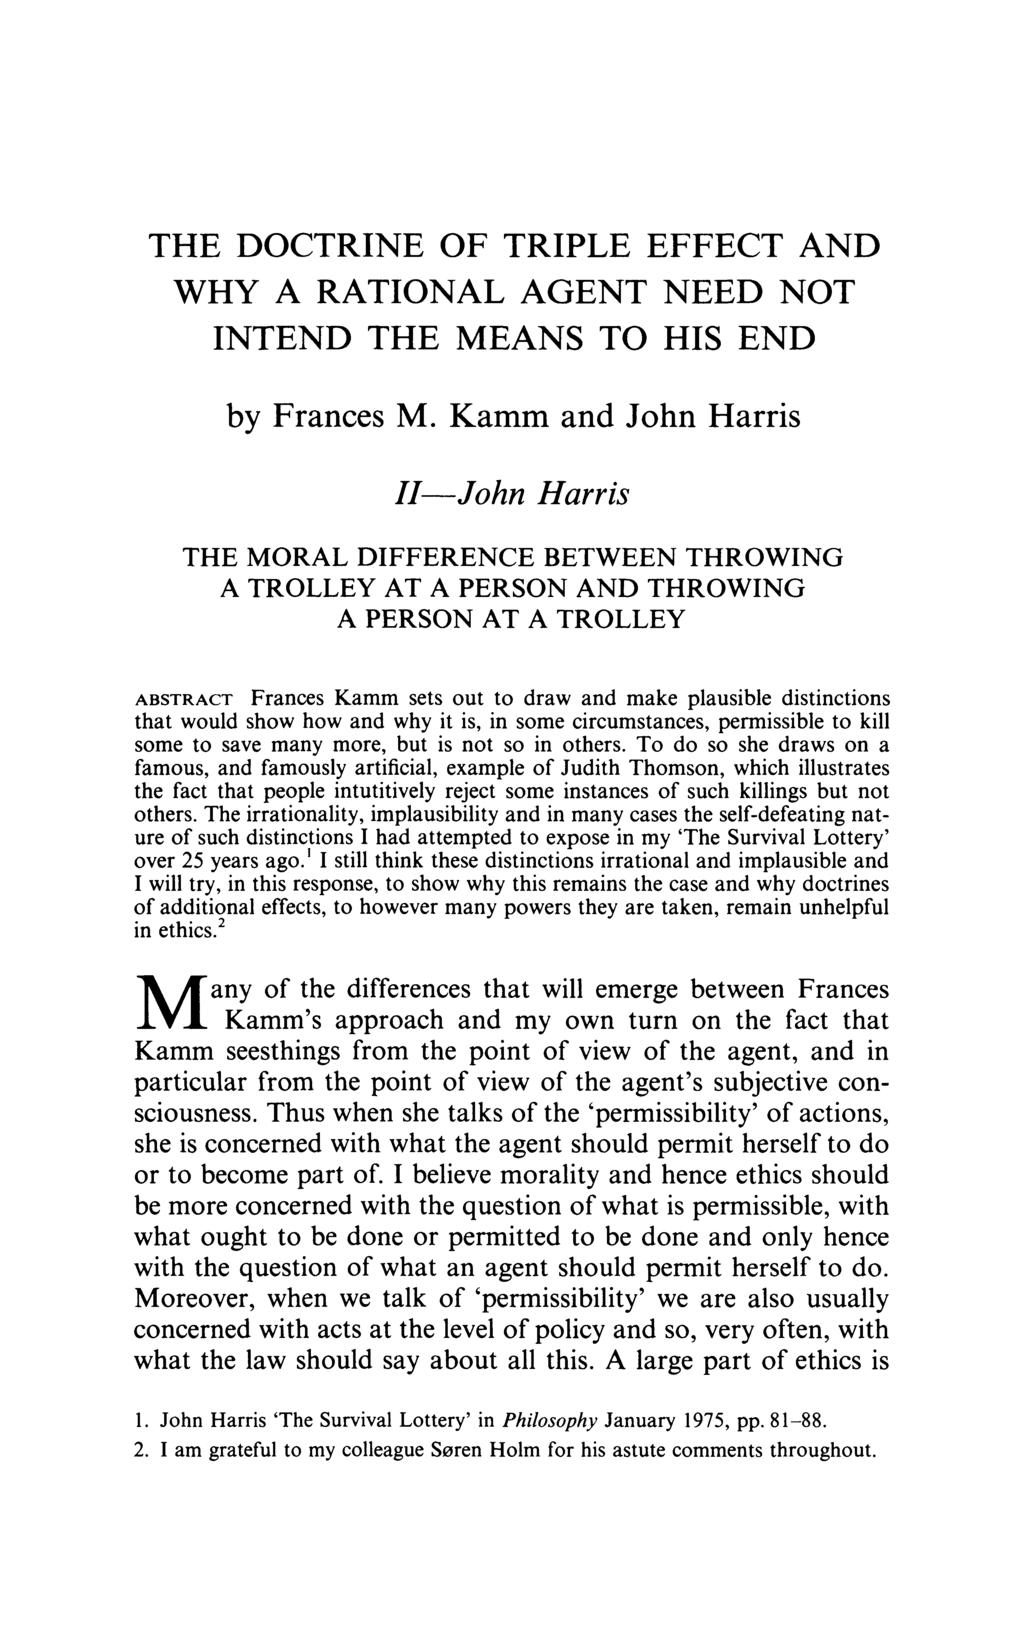 THE DOCTRINE OF TRIPLE EFFECT AND WHY A RATIONAL AGENT NEED NOT INTEND THE MEANS TO HIS END by Frances M.